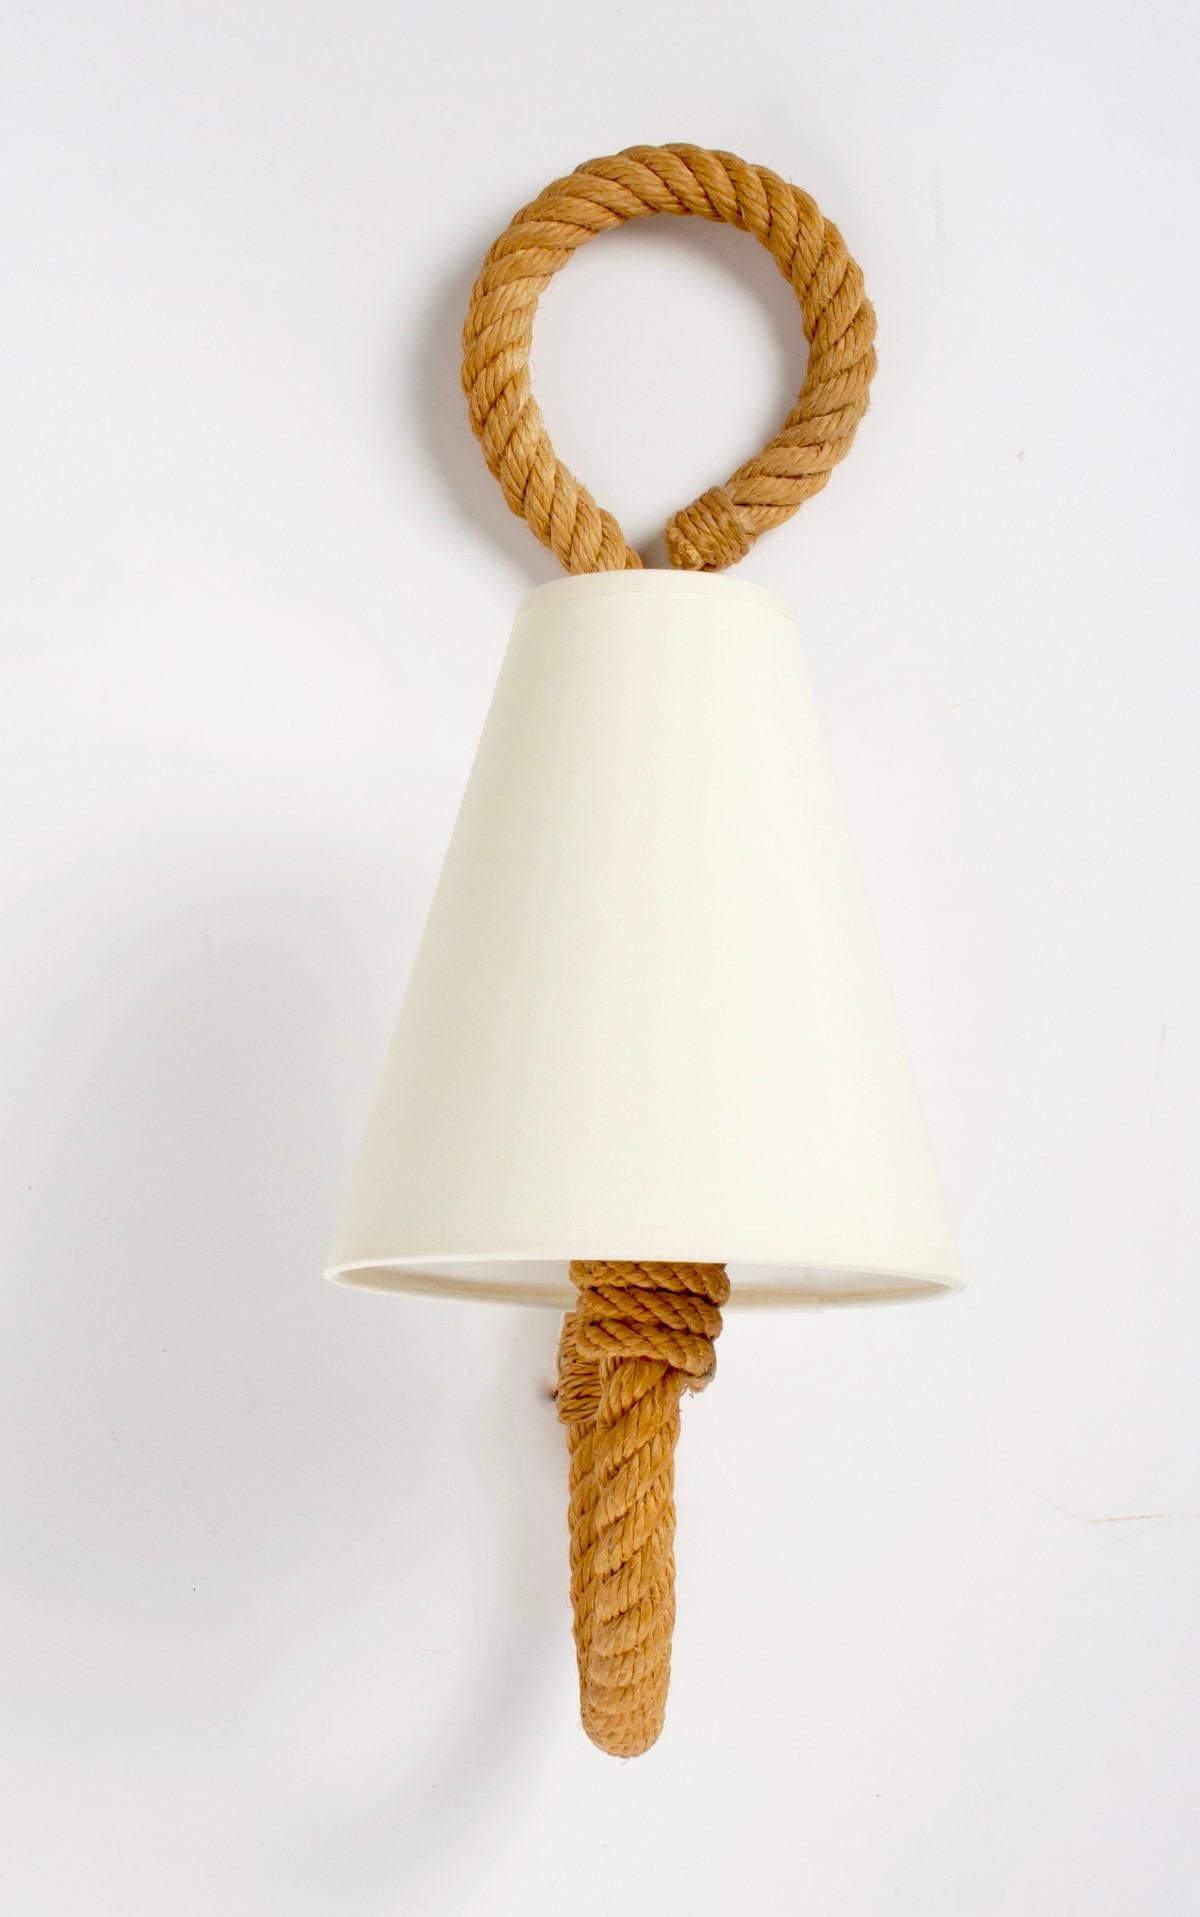 All made of weaved rope the sconces feature one curved arm, ended on the upper part with a buckle. Off-white cotton shades granted to the original. One bulb per sconce.
Adrien Audoux and Frida Minet are known for their lights and furniture made of